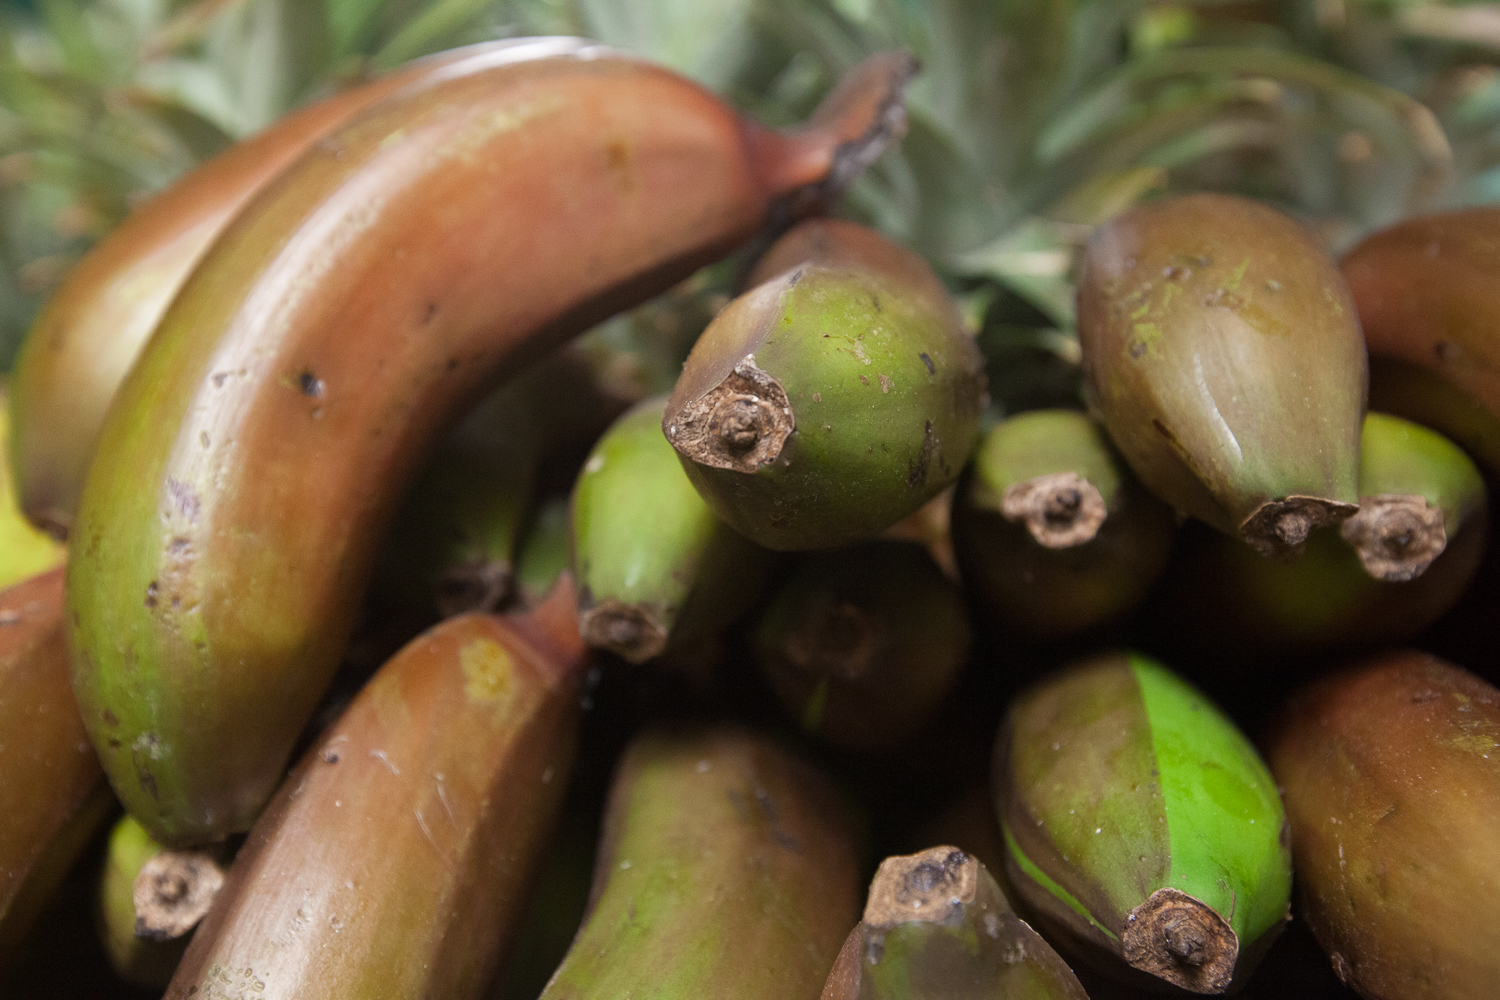 organic red bananas from Mana Foods Produce Department